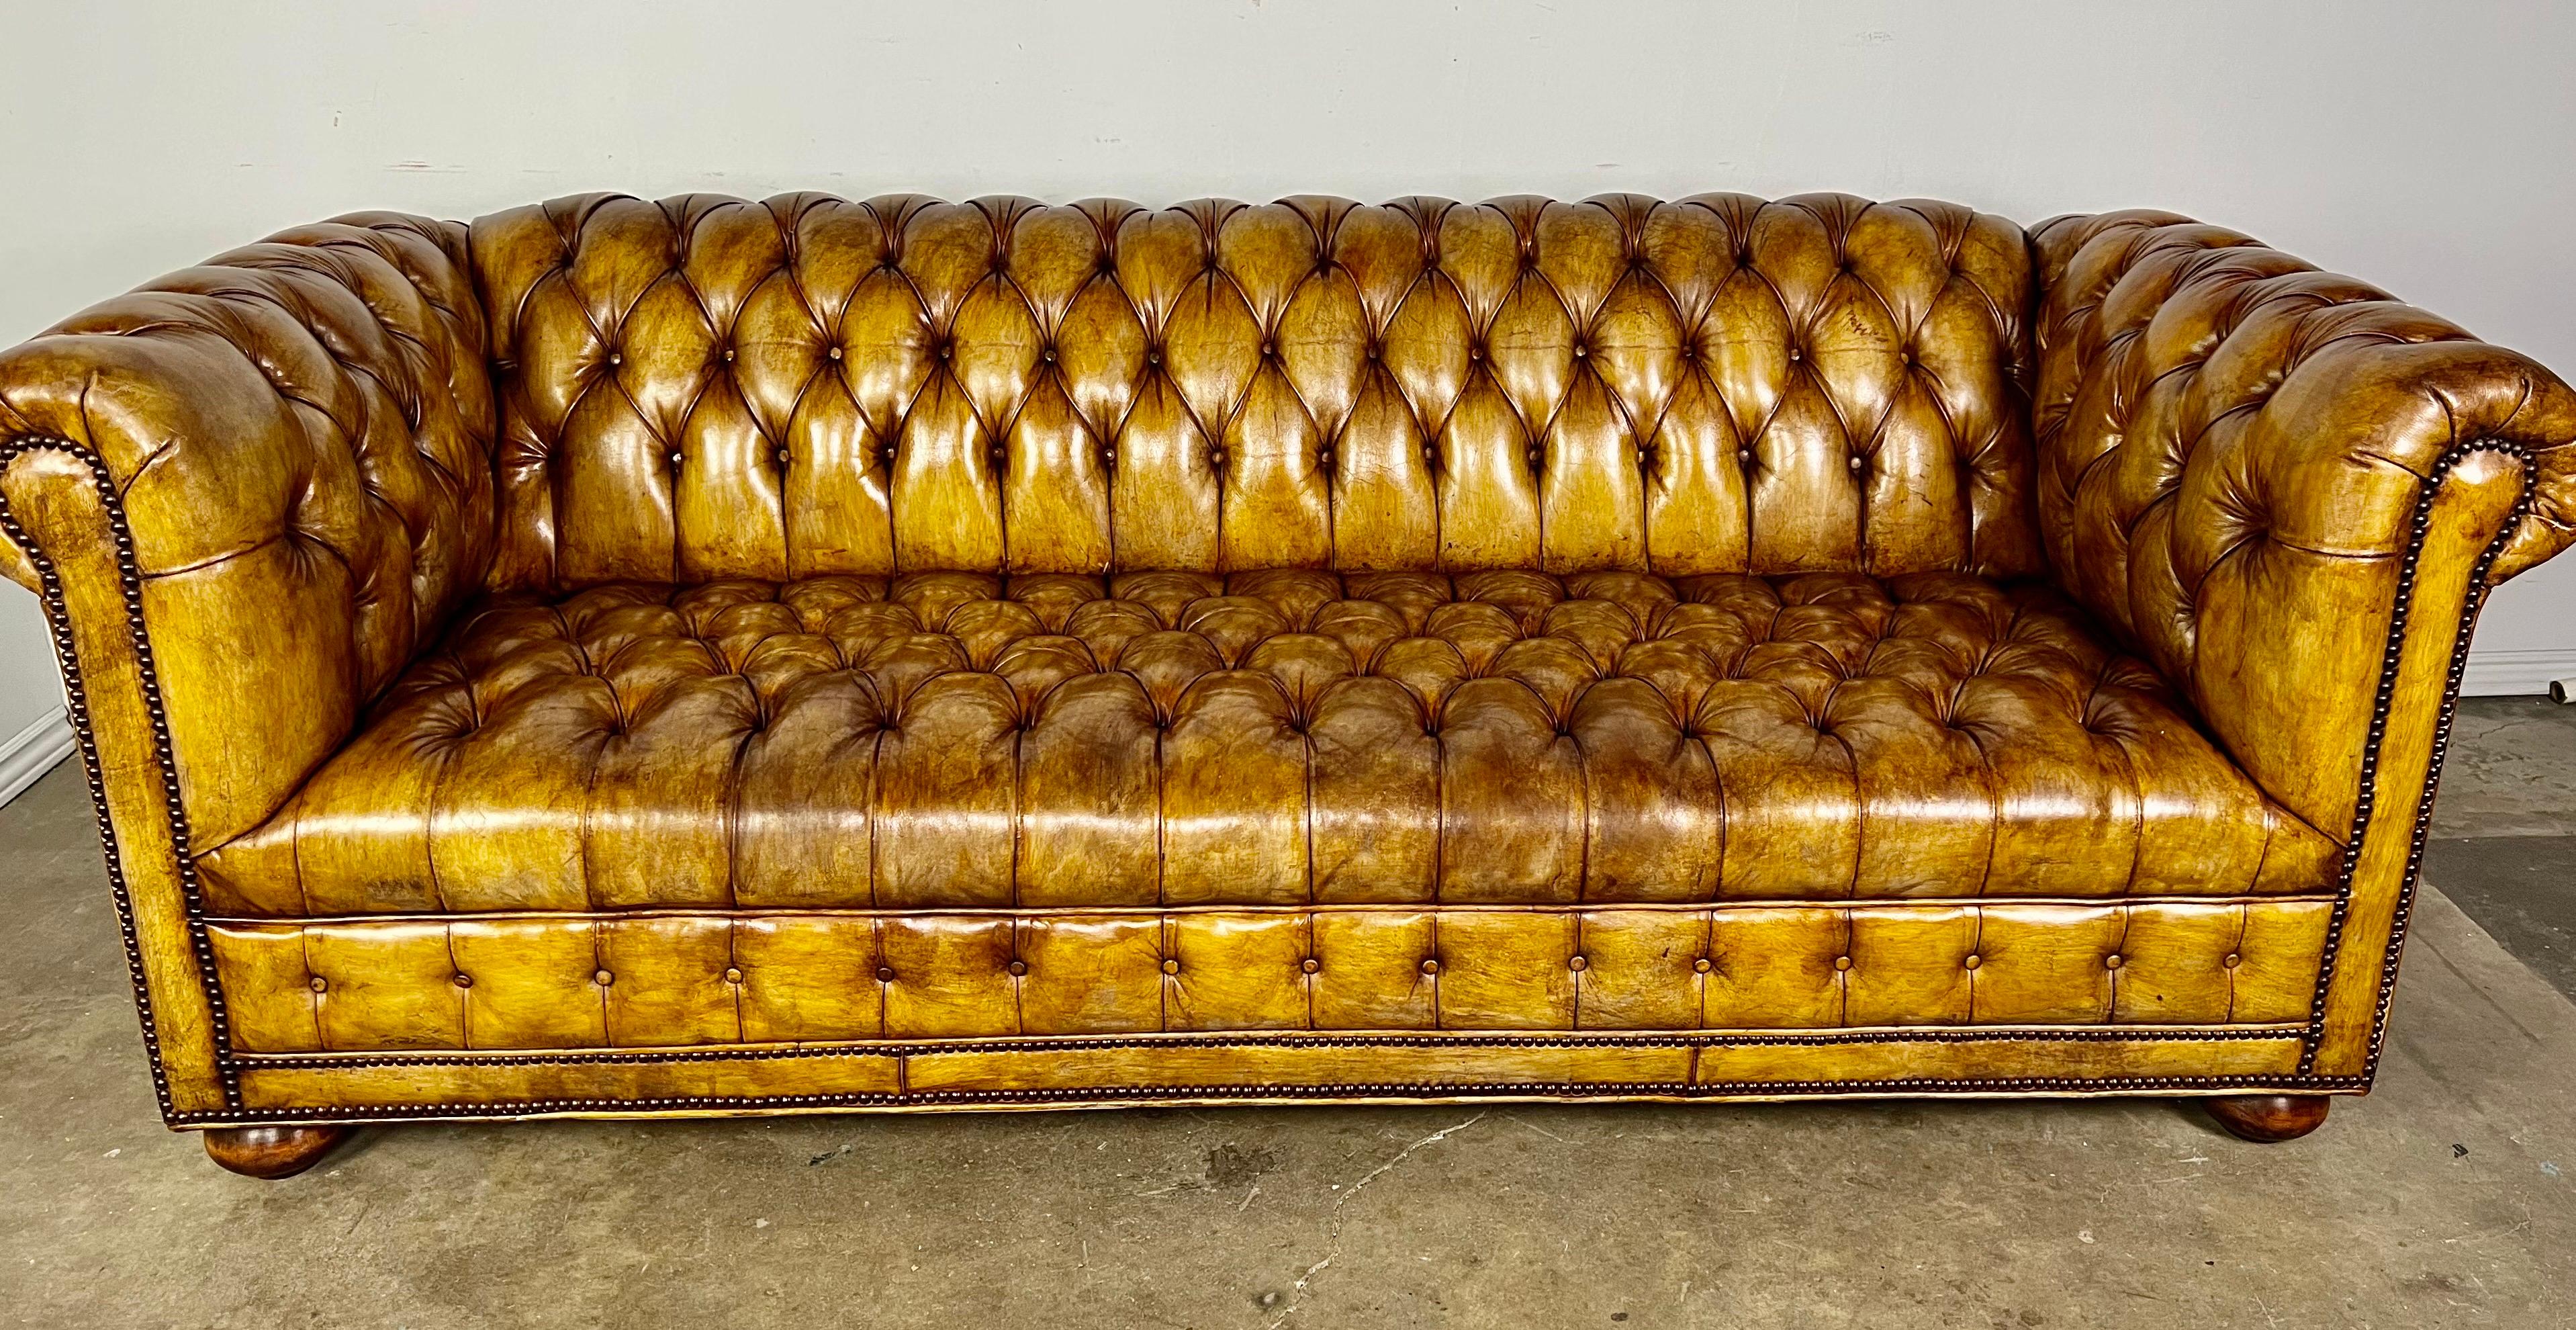 Early 20th century English leather tufted Chesterfield sofa with nailhead trim detail. The sofa stands on four traditional bun feet. The sofa is upholstered in a tobacco colored leather and has developed a beautiful patina over the years. Excellent